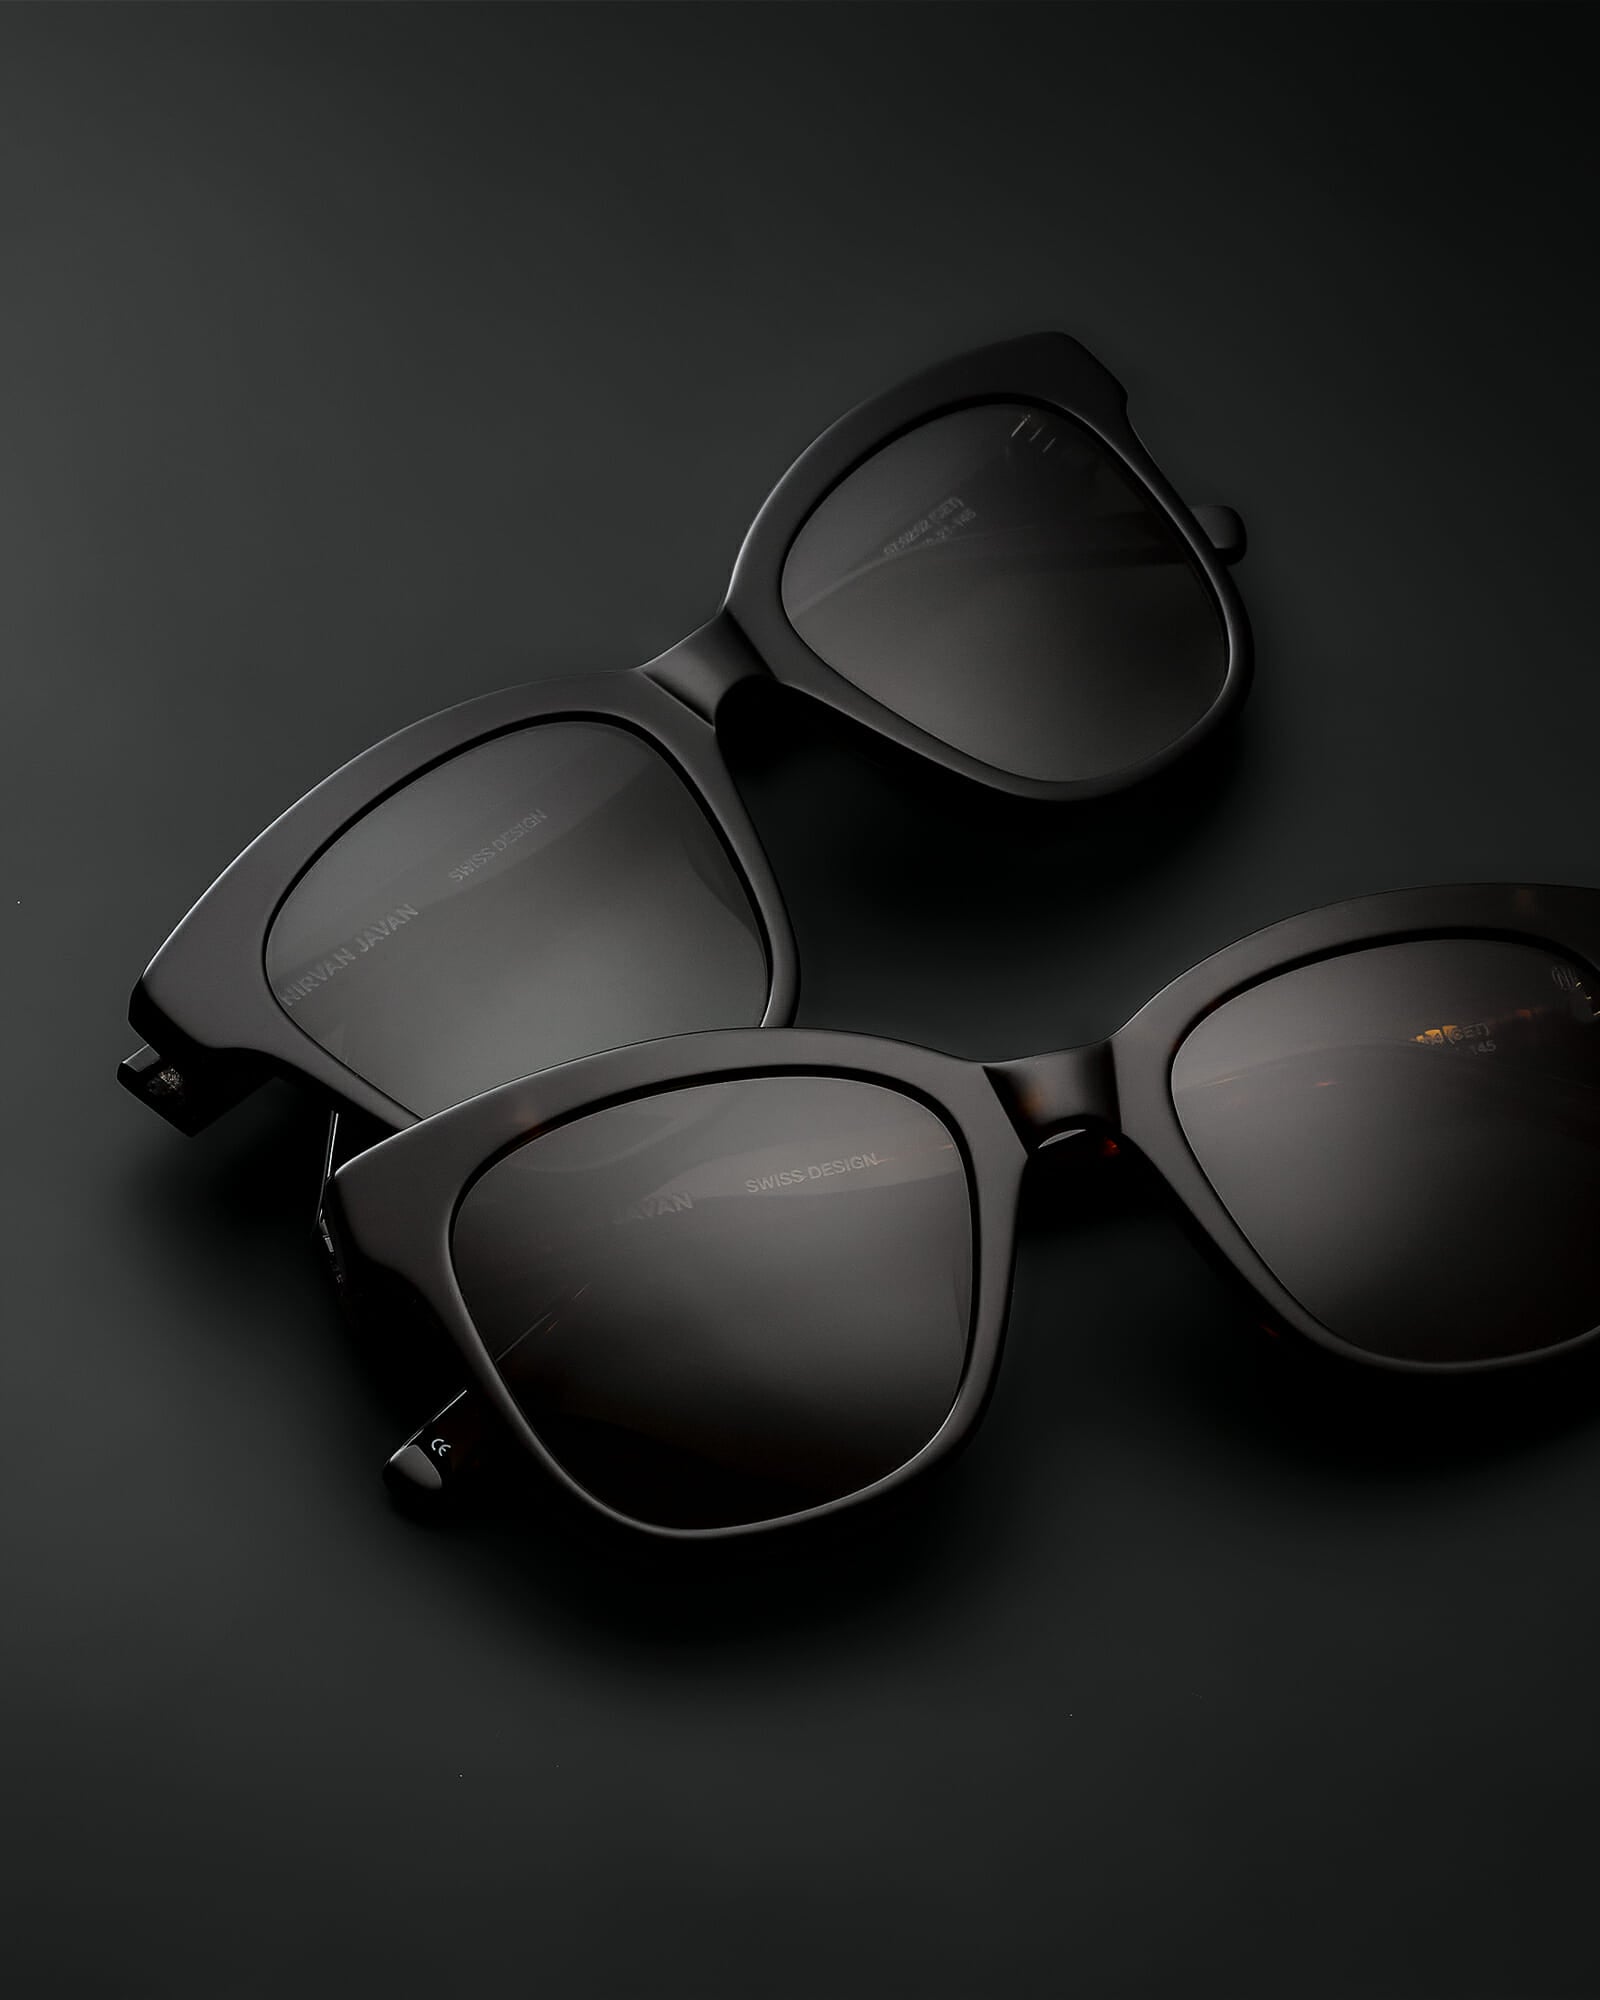 Two cat eye acetat shades, one in black with grey lenses, one in brown with brown lenses on a black background, the frames are folded